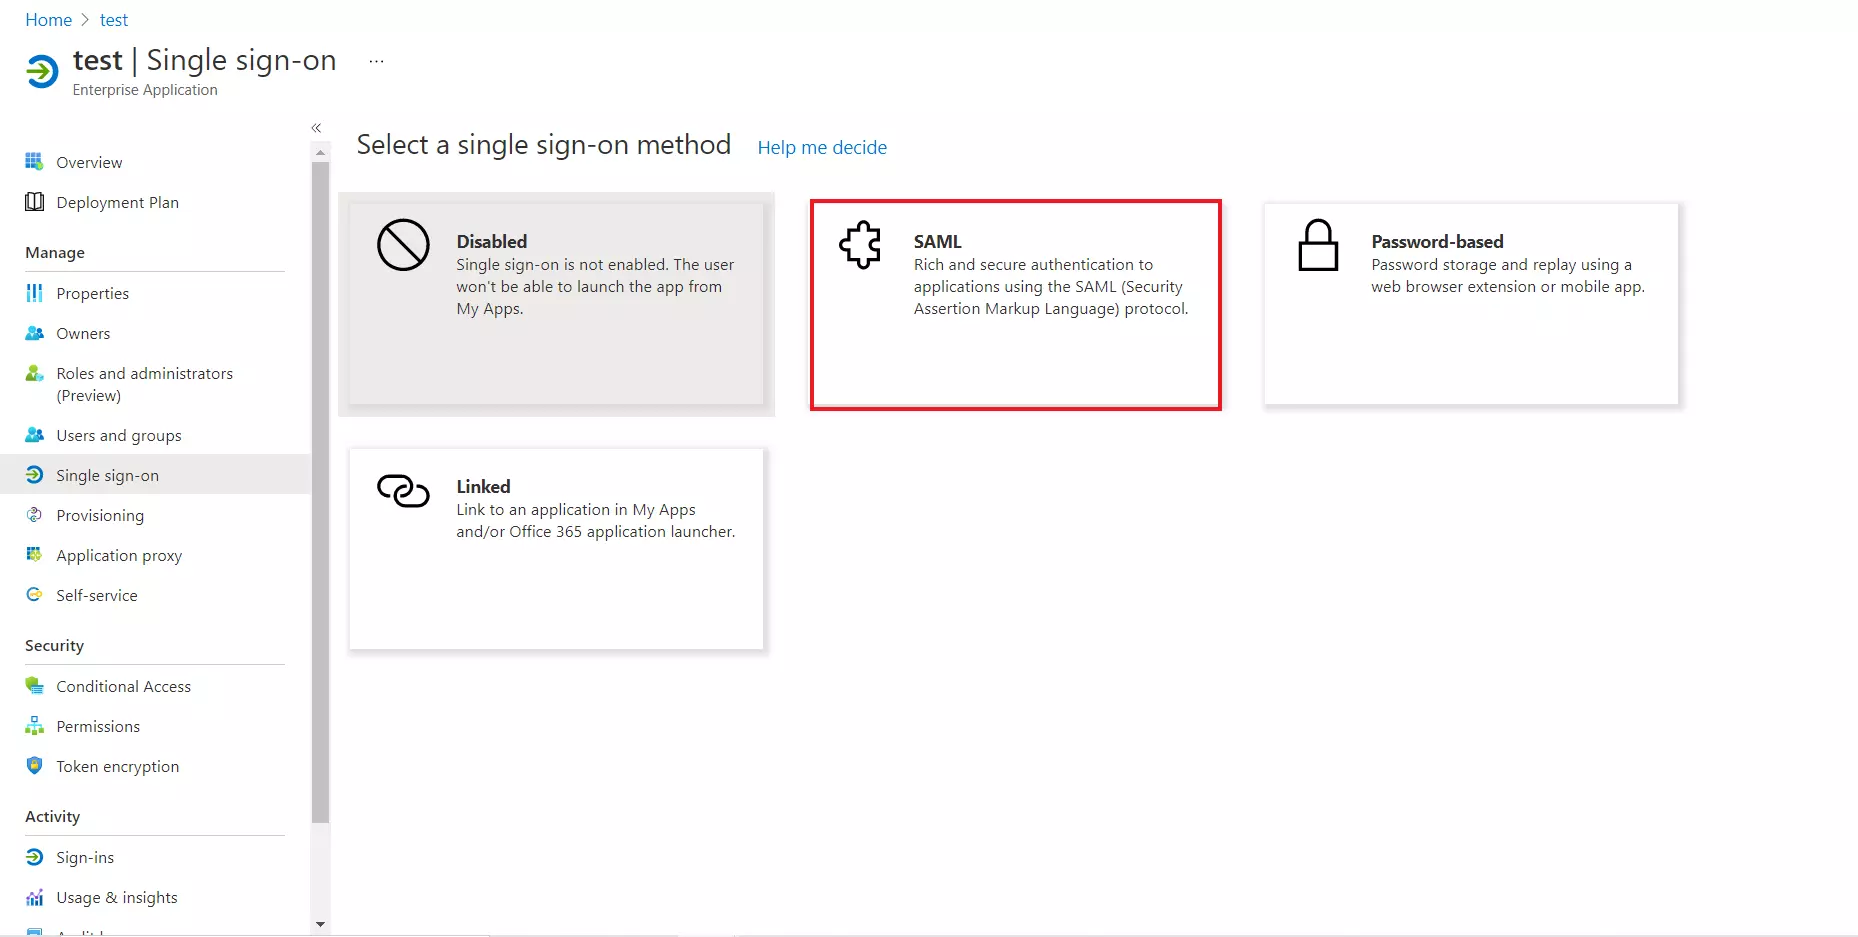 nopCommerce Single Sign-On (SSO) using Azure AD as IDP - Add Non-Gallery Application